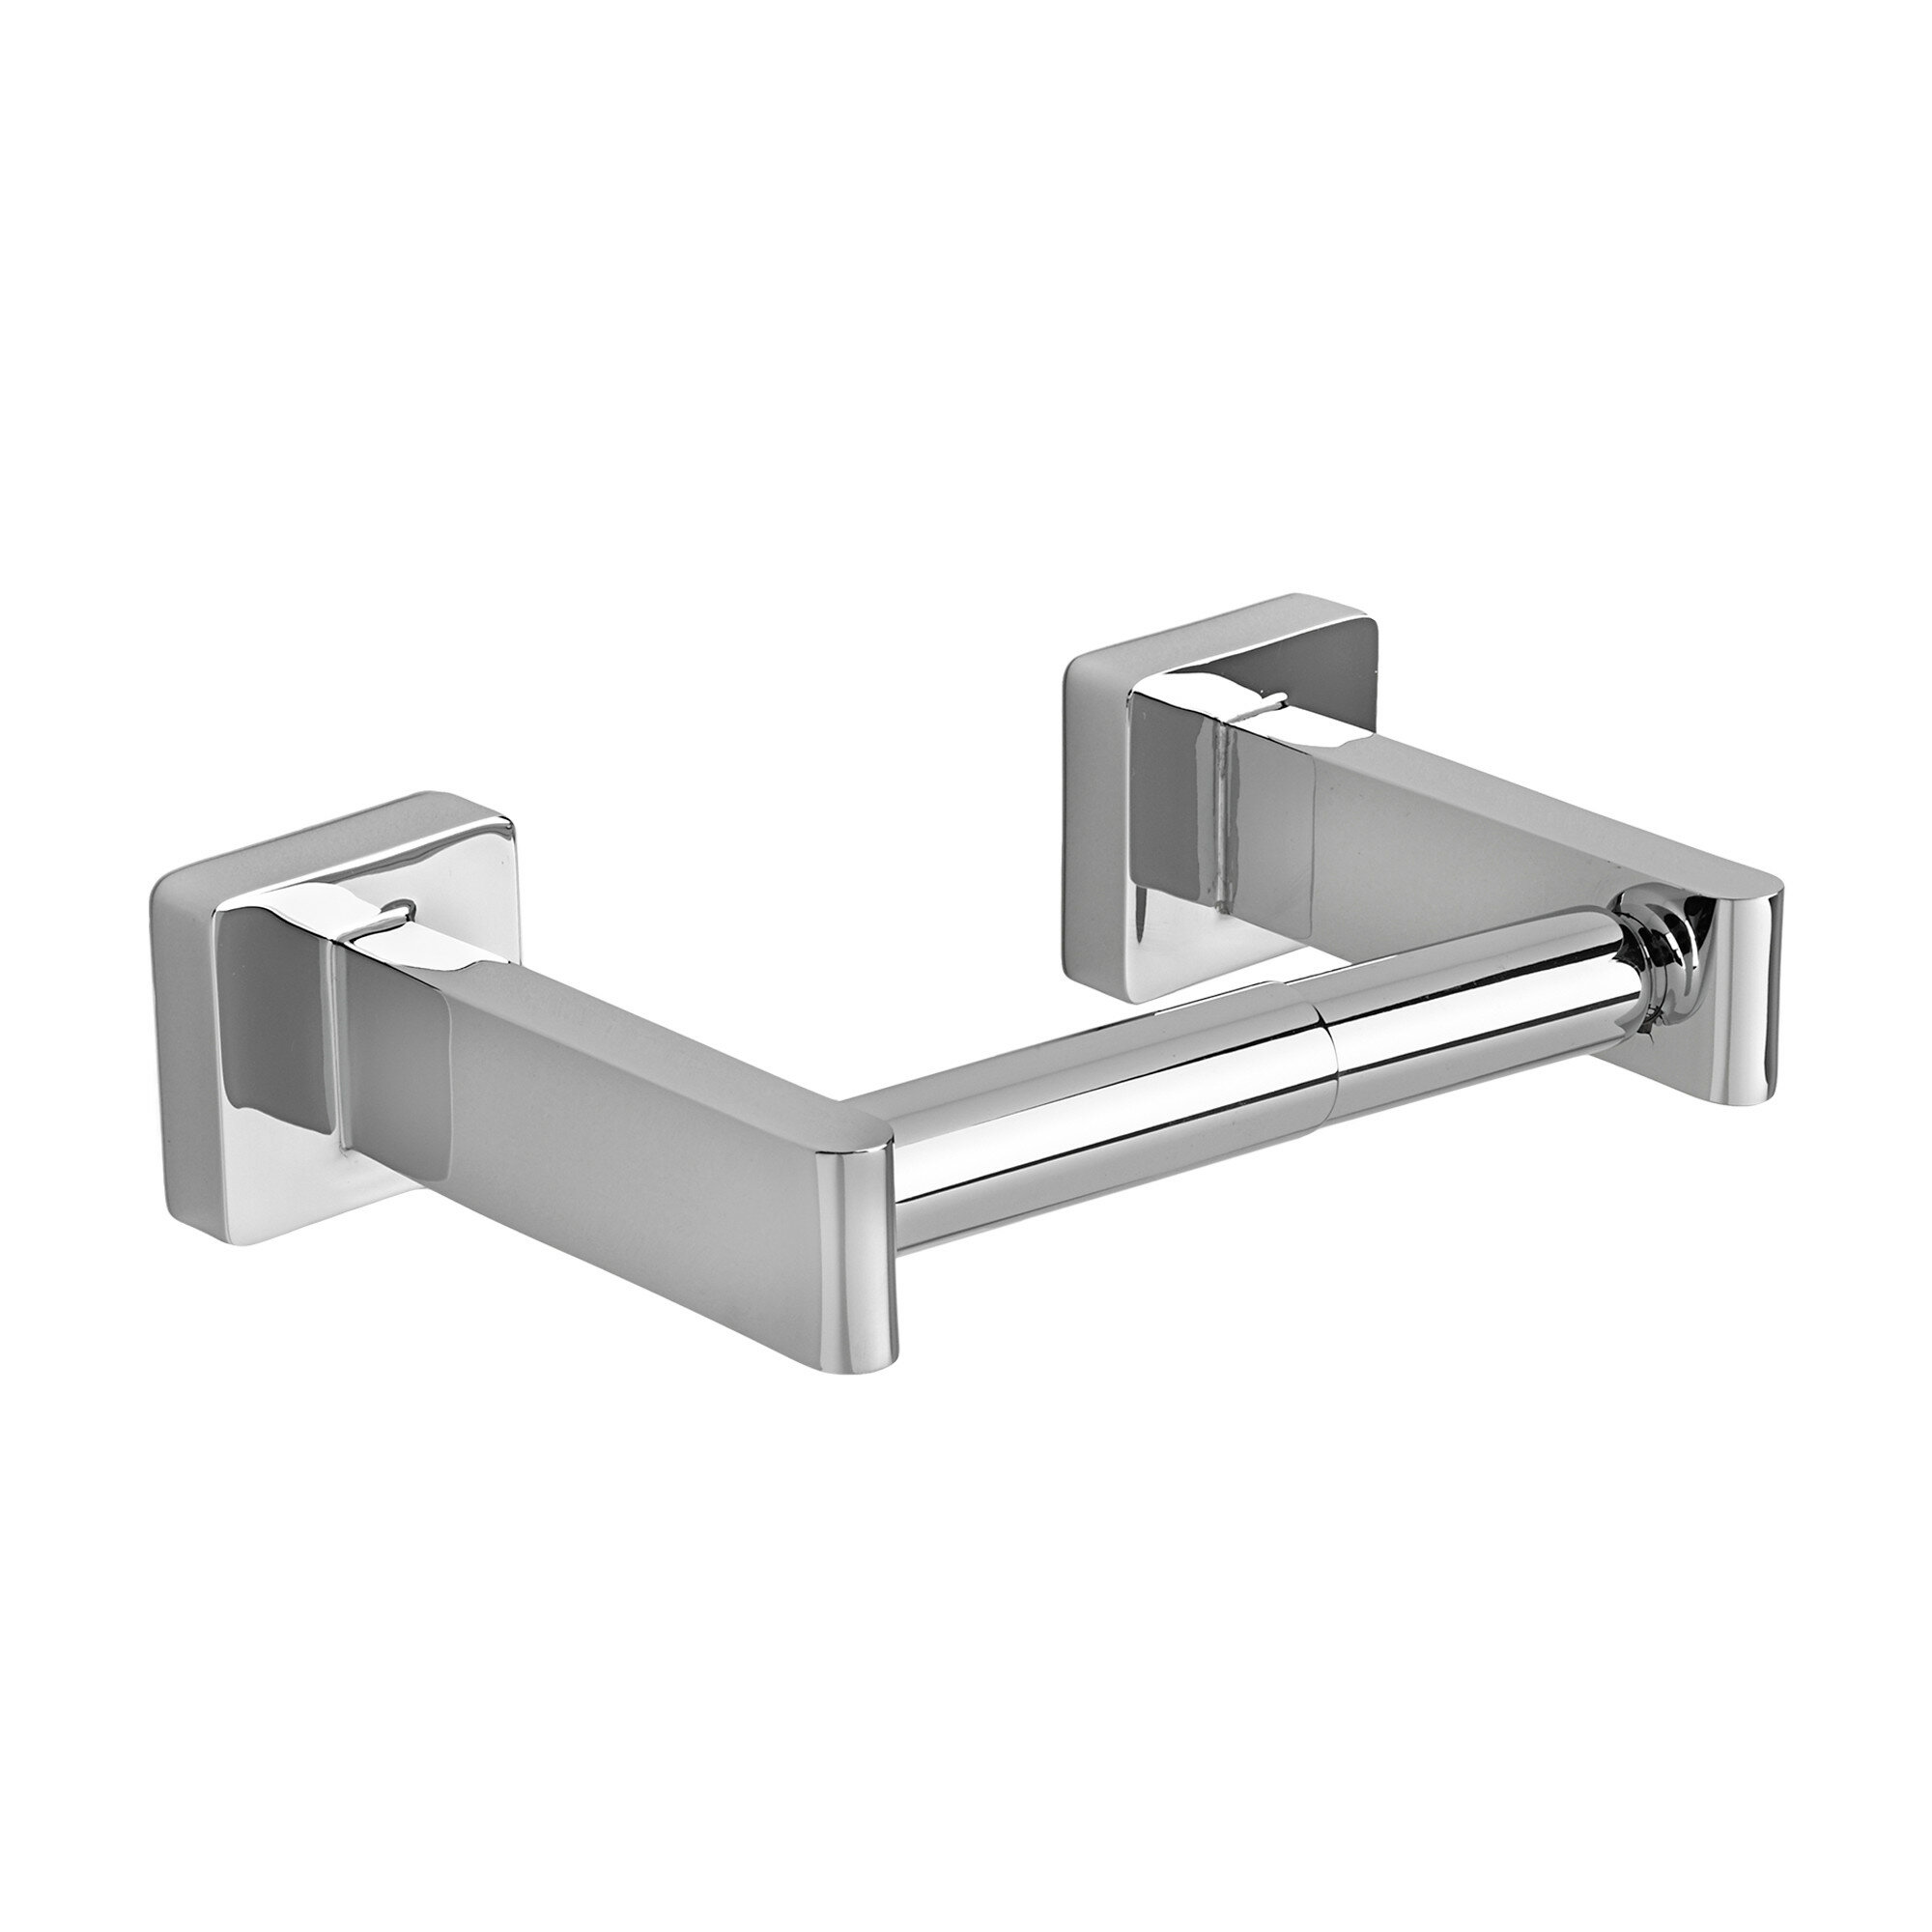 SOLID CHROMED METAL SQUARE BATHROOM ACCESSORY WALL MOUNTED TOWEL RING